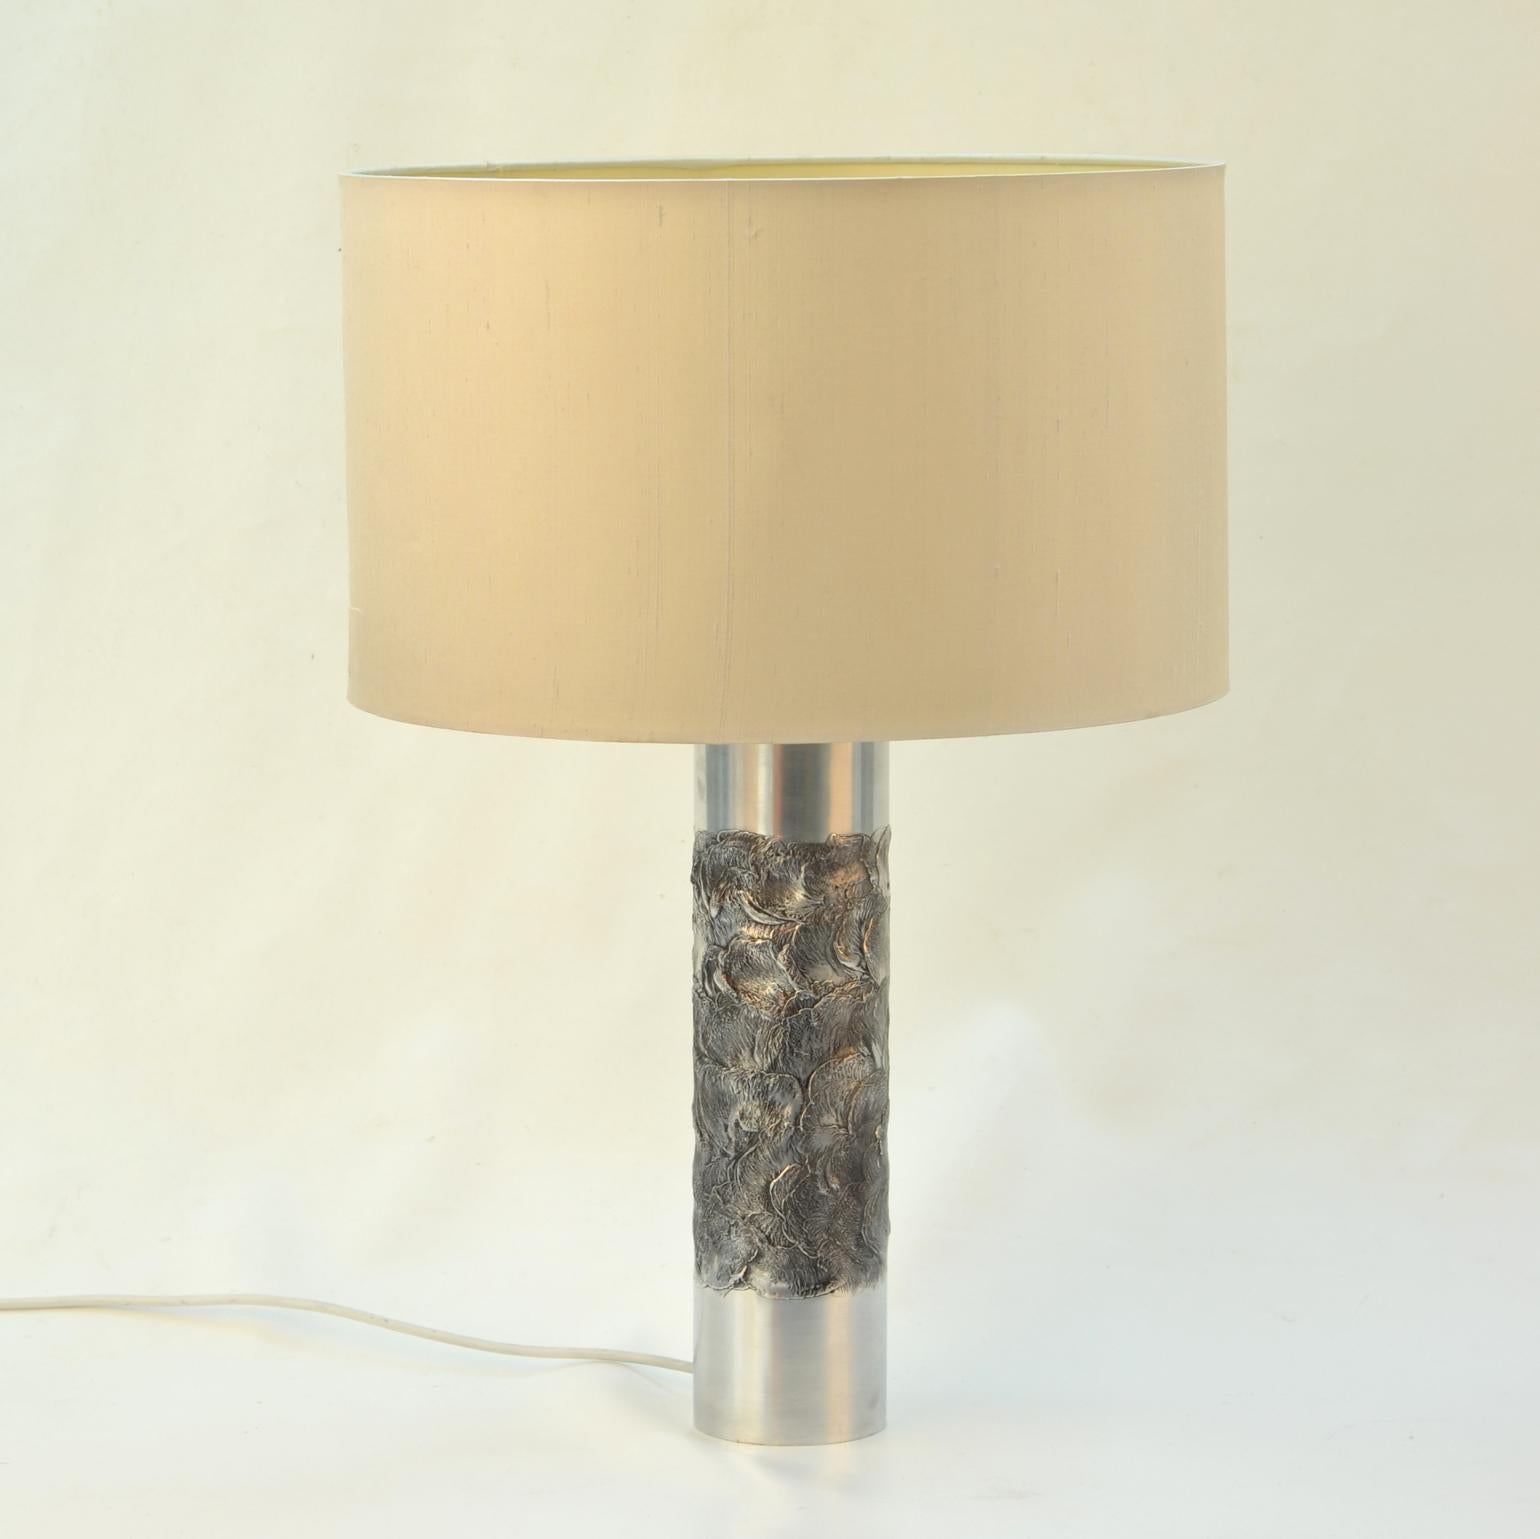 Pair of Brutalist cast aluminum cylinder table Lamps with organic textured relief by Willy Luyckx, Belgium, 1970. Willy Luyckx was a goldsmith who worked for goldsmith Camille Colruyt before starting his own business in the 1960's.
The 1960's gave